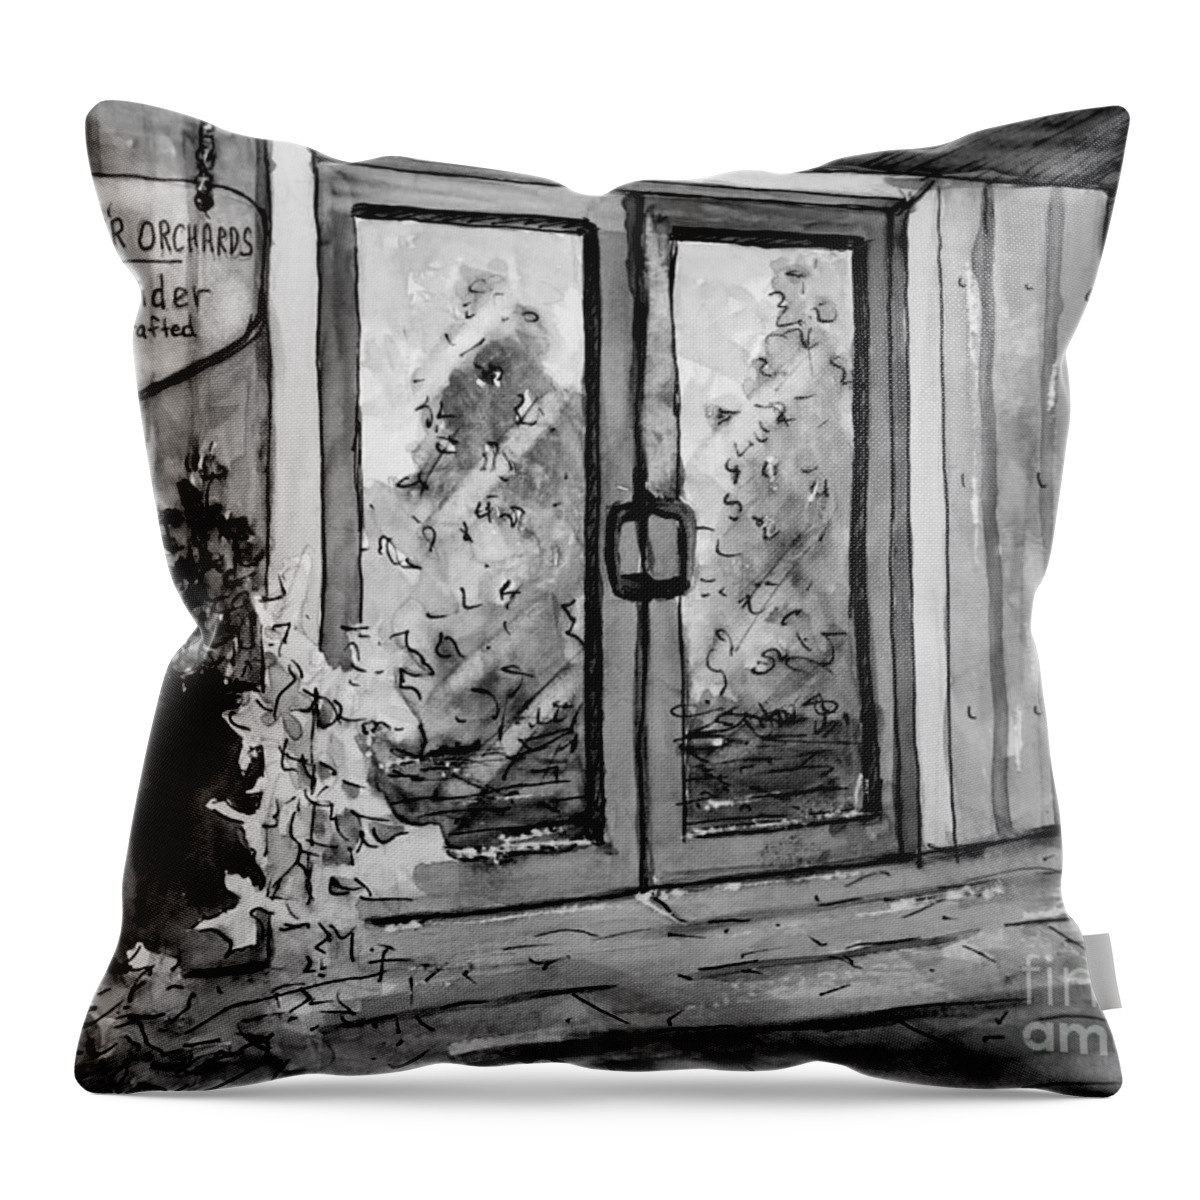 Mercier Orchard Throw Pillow featuring the painting Mercier Orchard's Cider in BW by Gretchen Allen